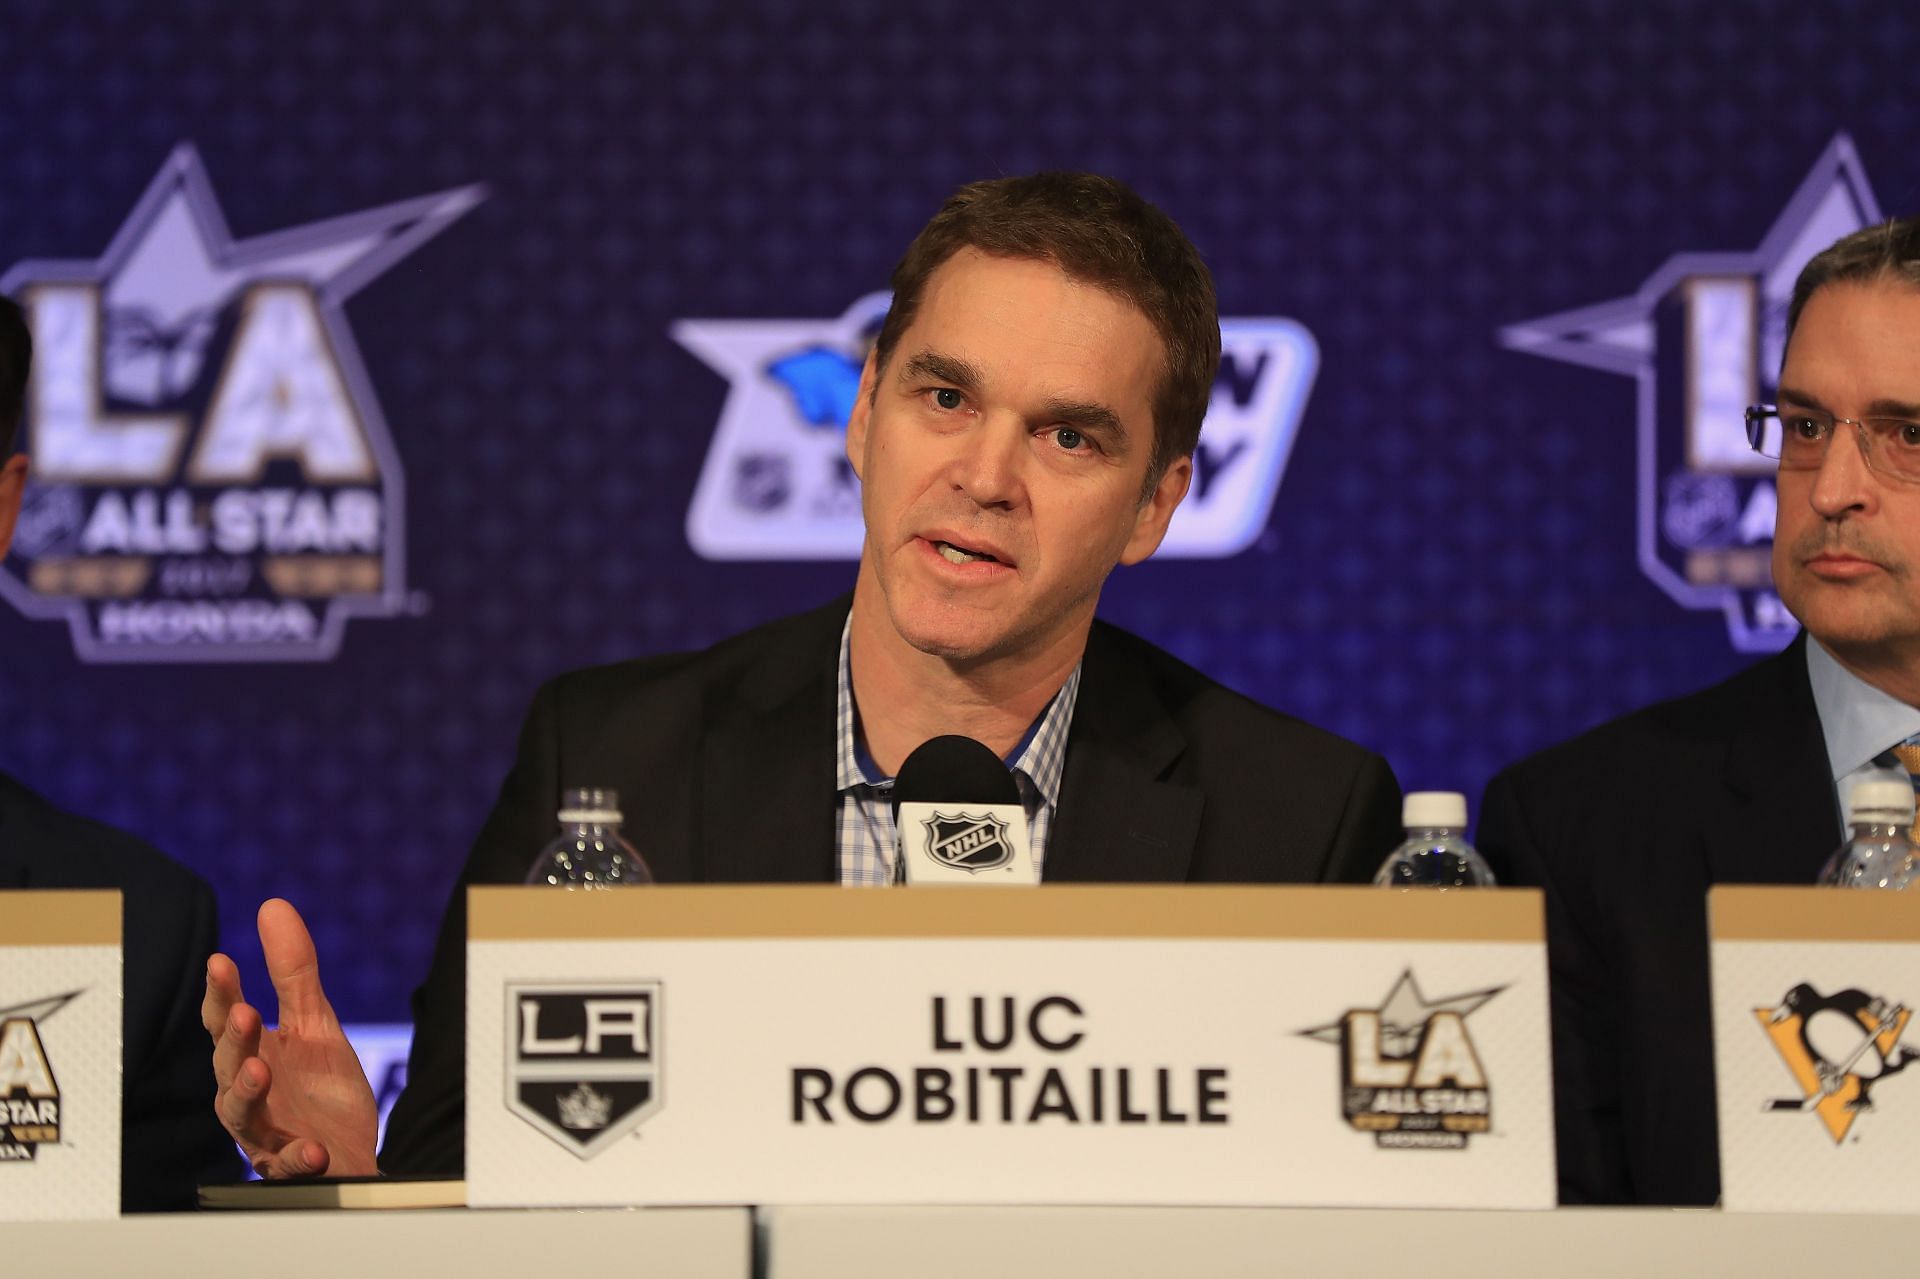 Luc Robitaille at the 2017 NHL All-Star Media Conference